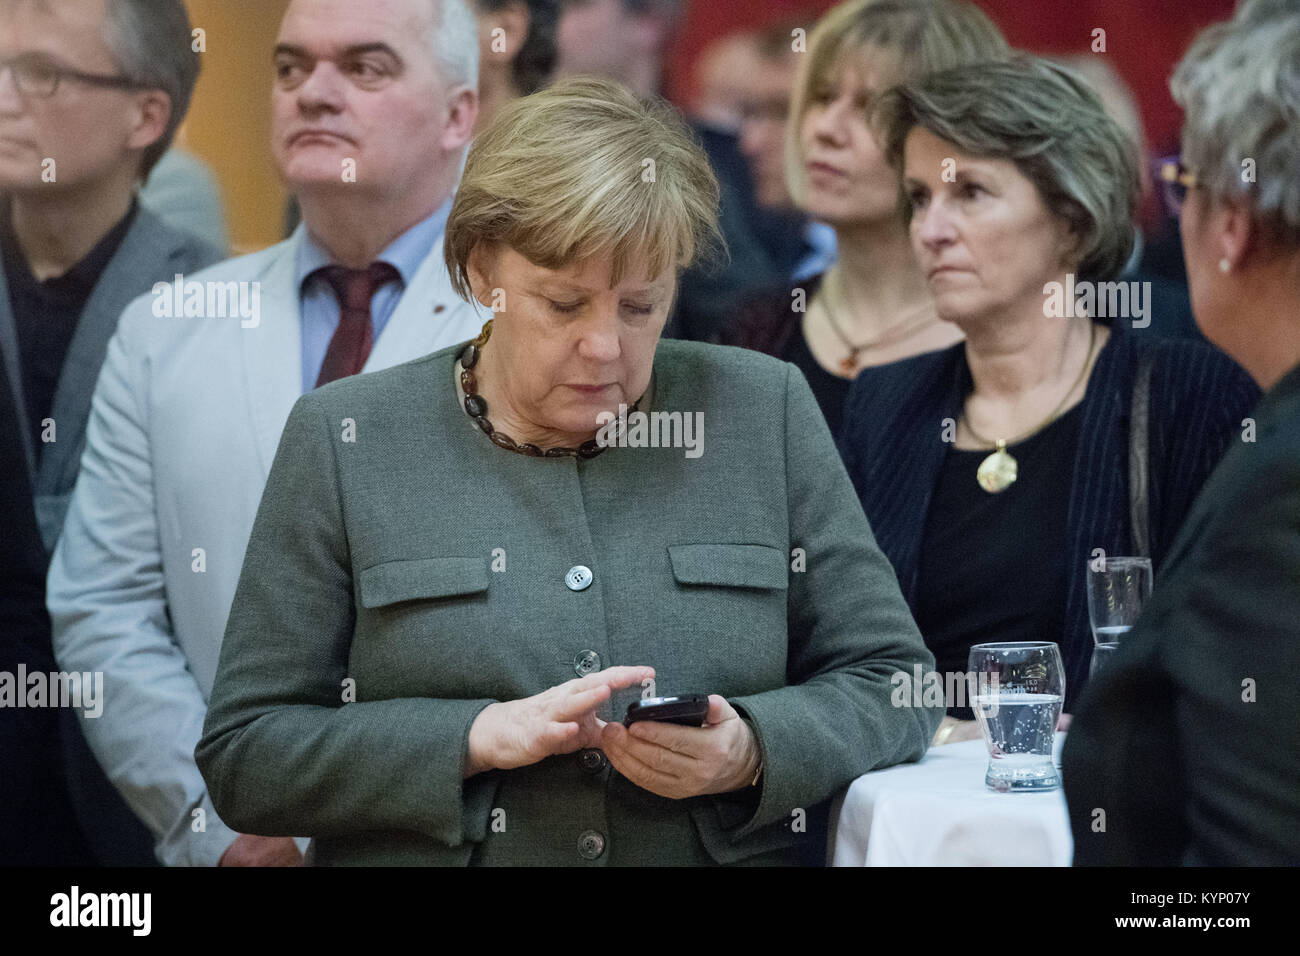 Trinwillershagen, Germany. 12th Jan, 2018. German Chancellor Angela Merkel (CDU) checks her telephone during the New Year's Reception of the state counsil of the district Vorpommern-Ruegen in Trinwillershagen, Germany, 12 January 2018. Merkel has been representing the electoral district Stralsund-Greifswald-Ruegen-Vorpommern since 1990 in the German Bundestag with a direct mandate. Credit: Stefan Sauer/dpa/Alamy Live News Stock Photo